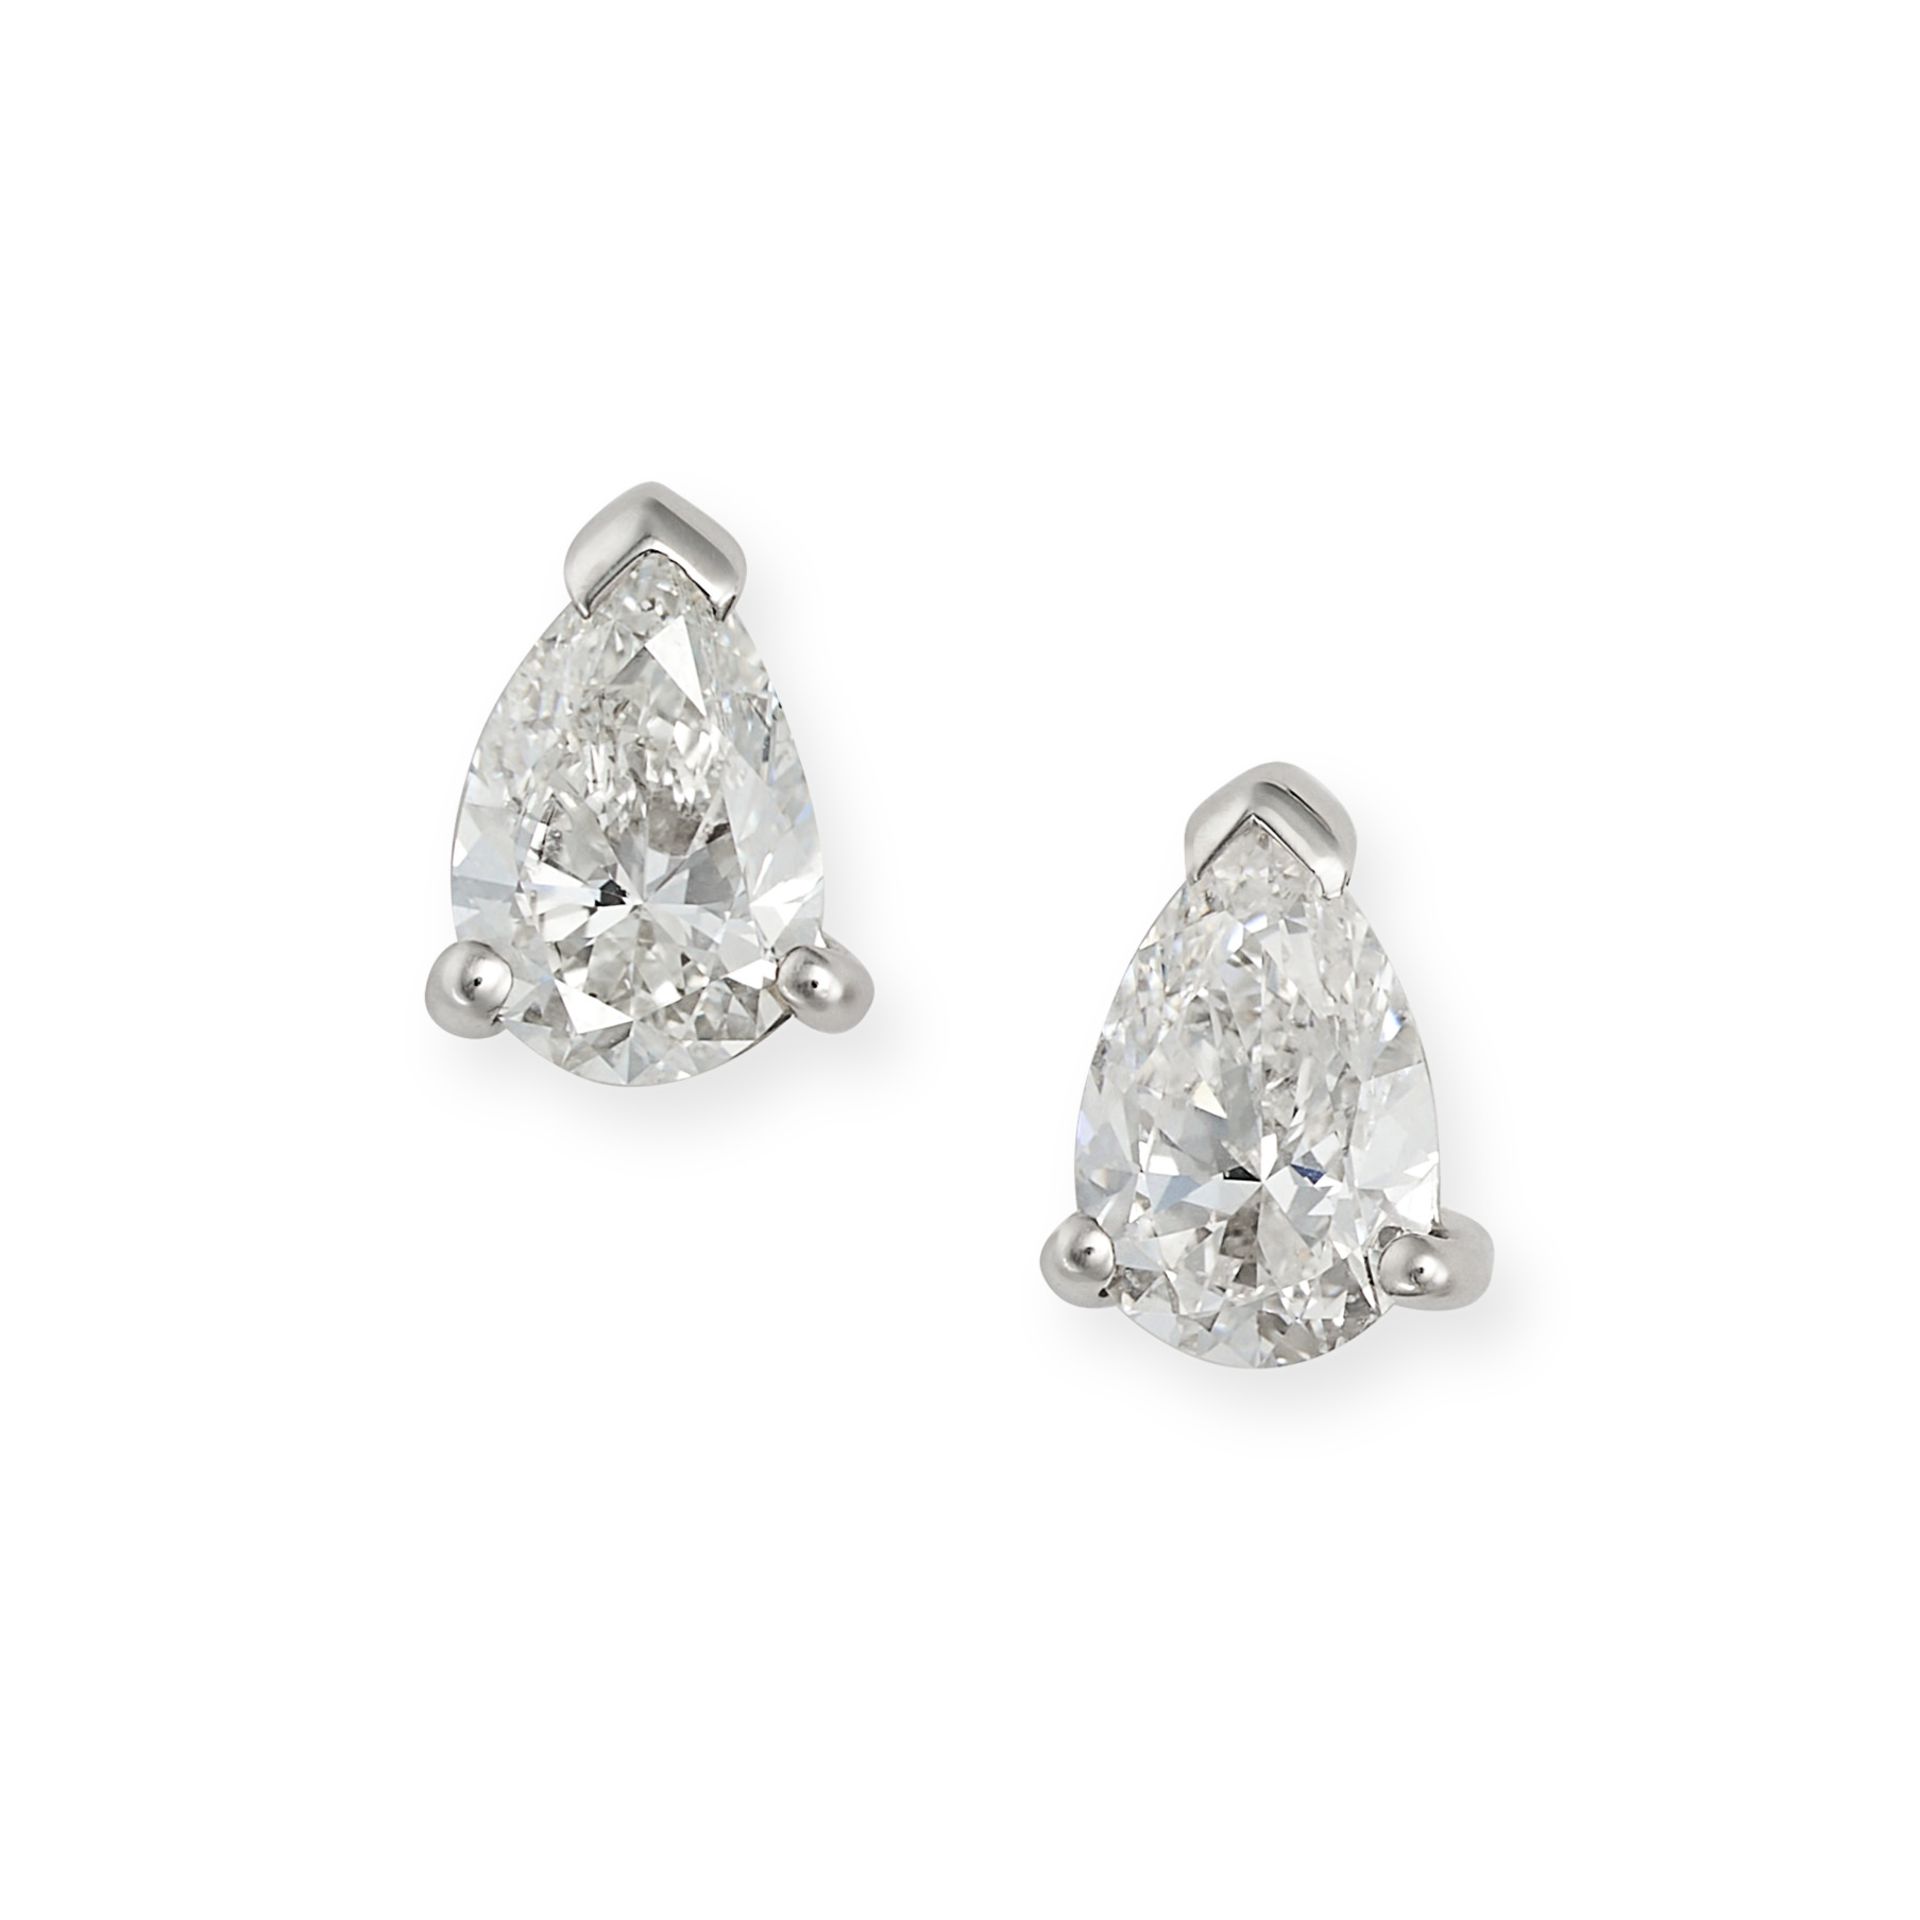 A PAIR OF DIAMOND STUD EARRINGS in 18ct white gold, each set with a pear cut diamond, the diamond...